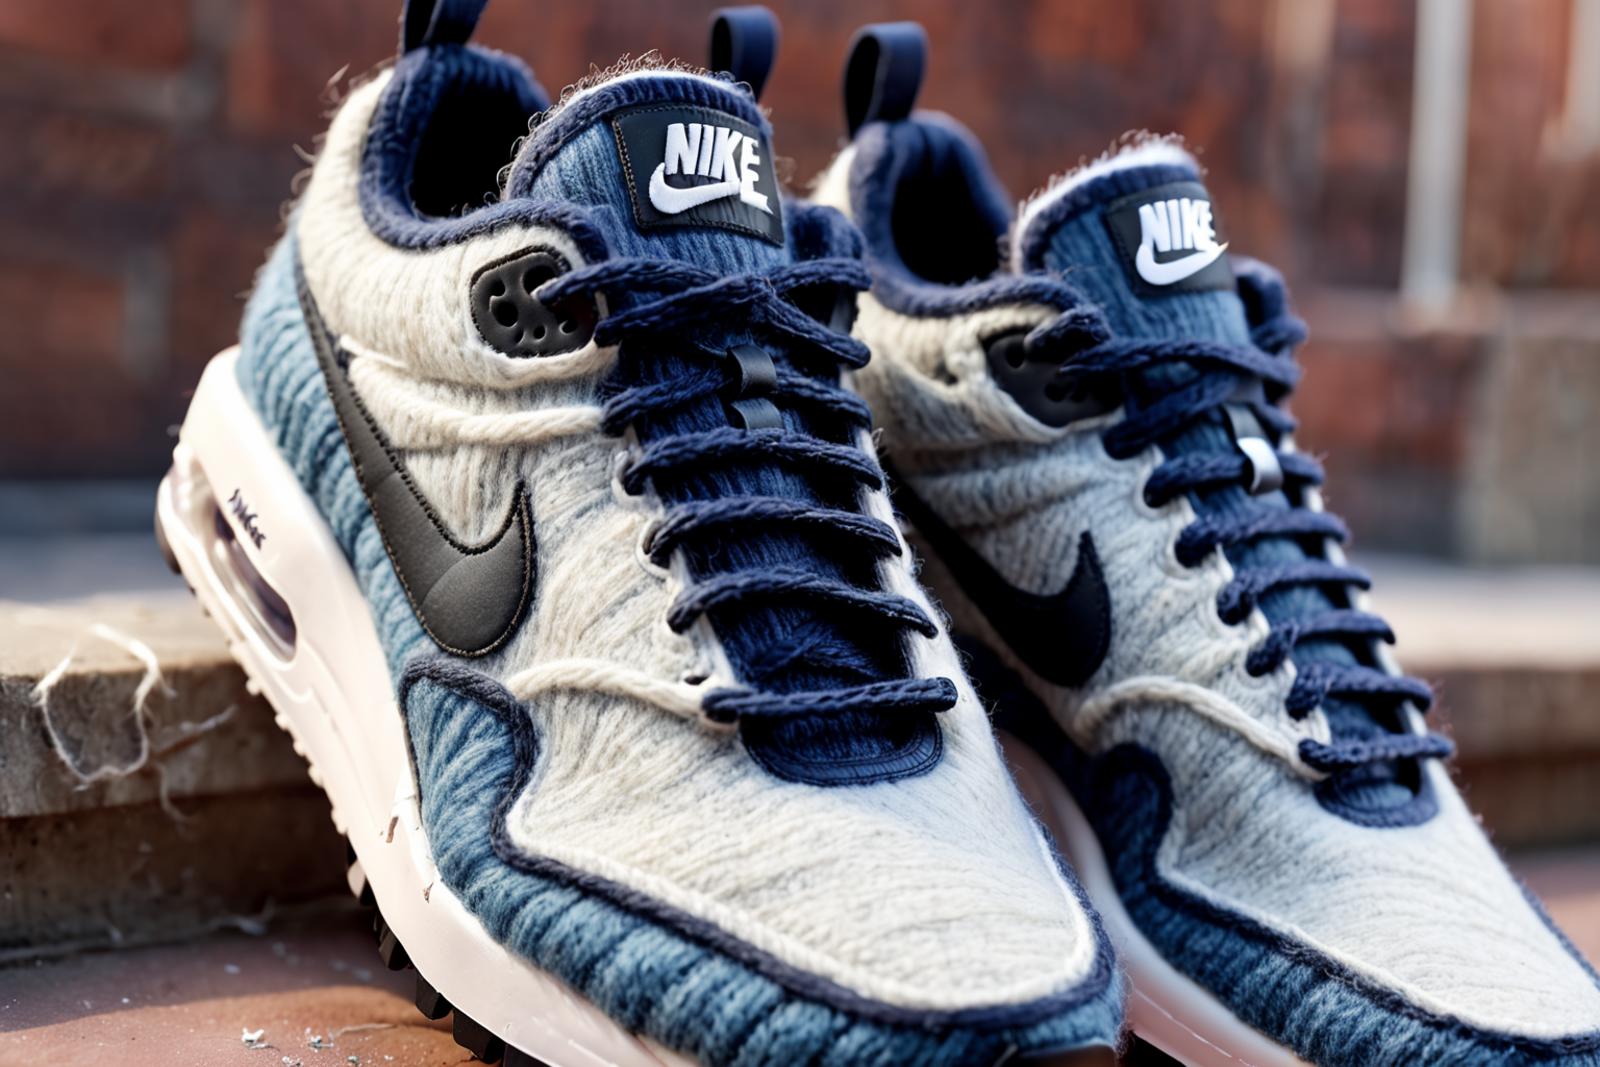 Blue and white Nike running shoes on a brick surface.